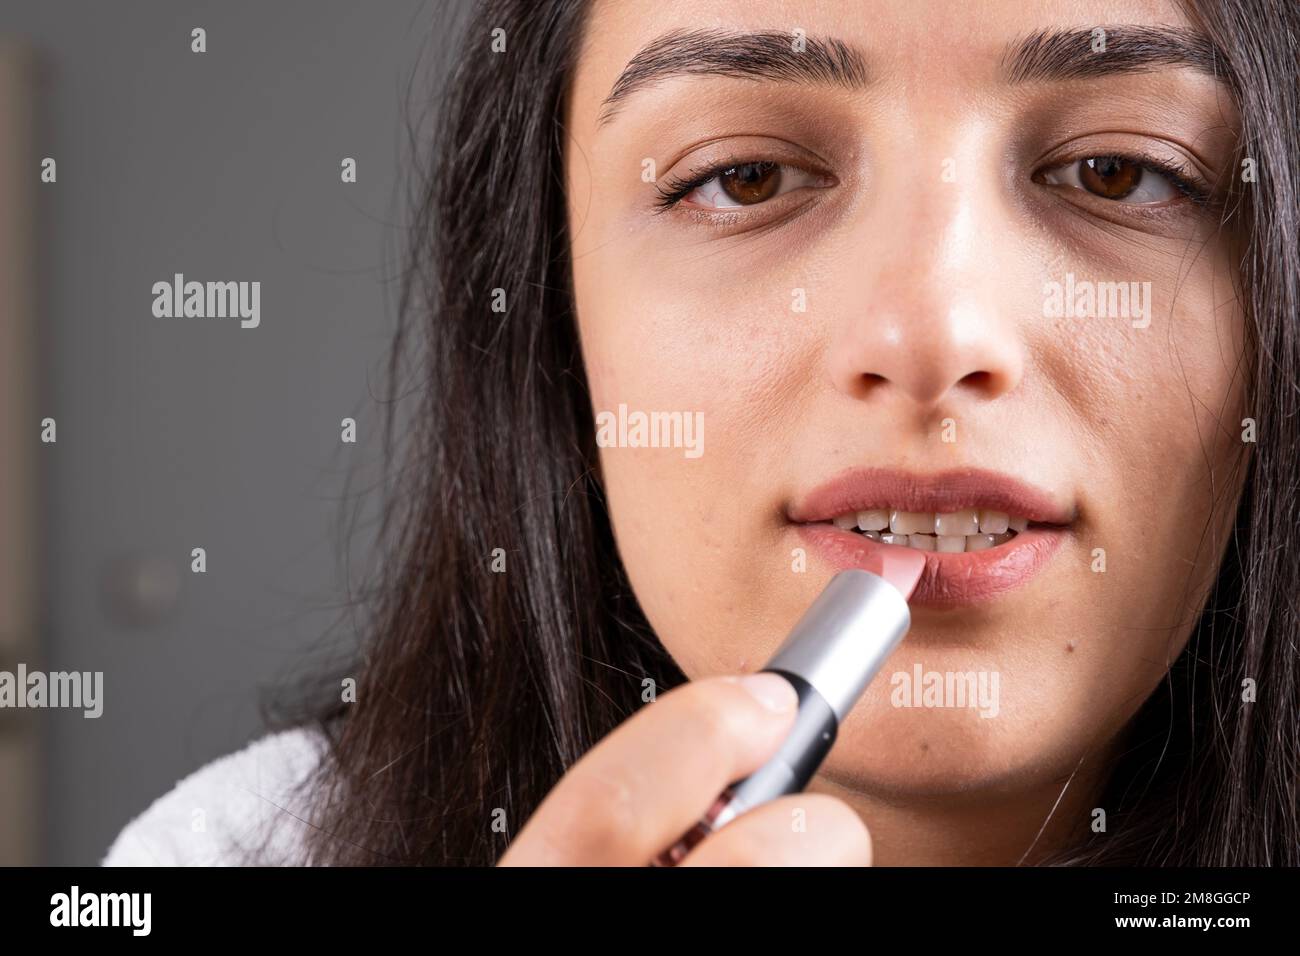 Close up image of woman holds lipstick. Rouging color on lips. Applying make up using professional cosmetics. Morning beauty routine of modern girl. Stock Photo